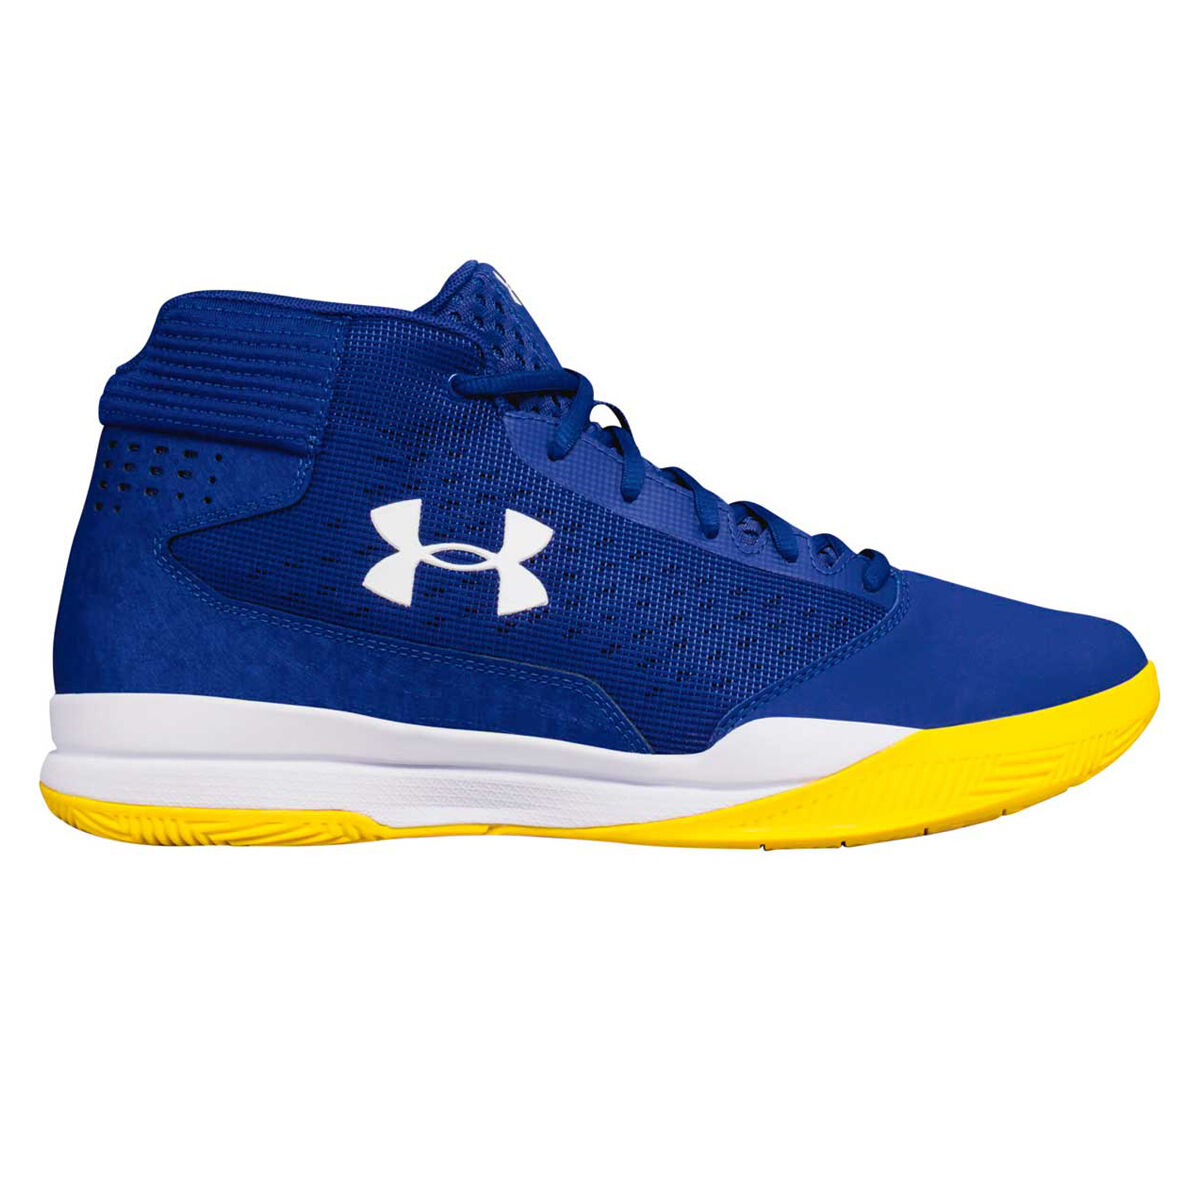 blue and yellow under armour basketball shoes